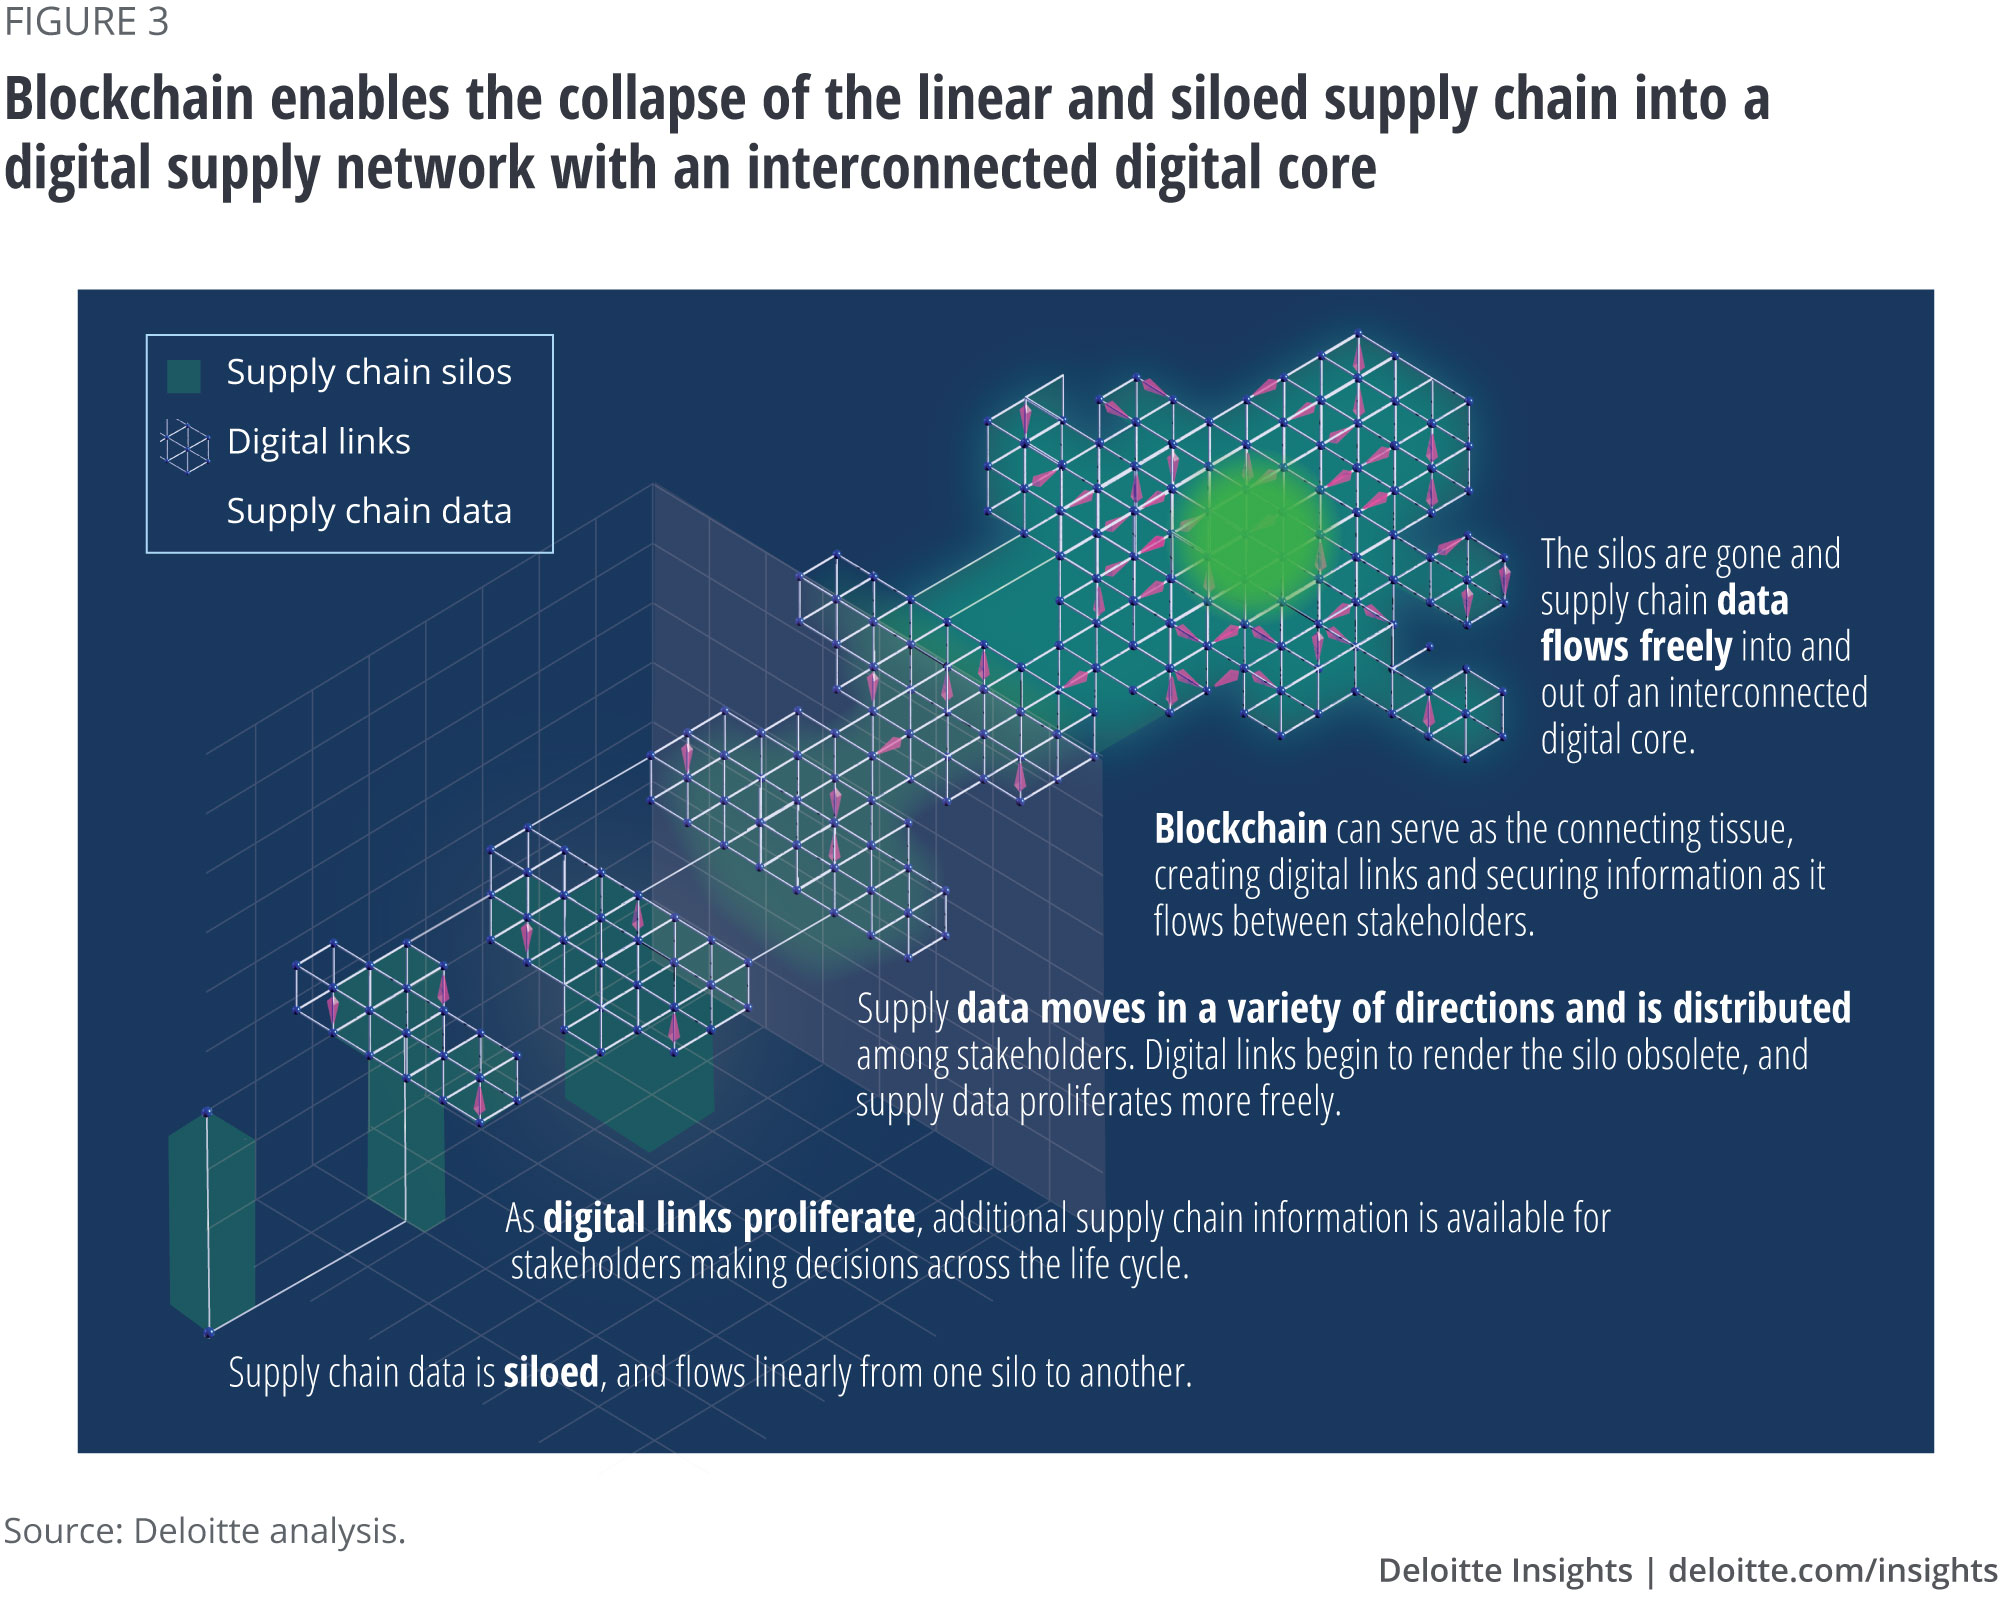 Blockchain enables the collapse of the linear and siloed supply chain into a digital supply network with an interconnected digital core